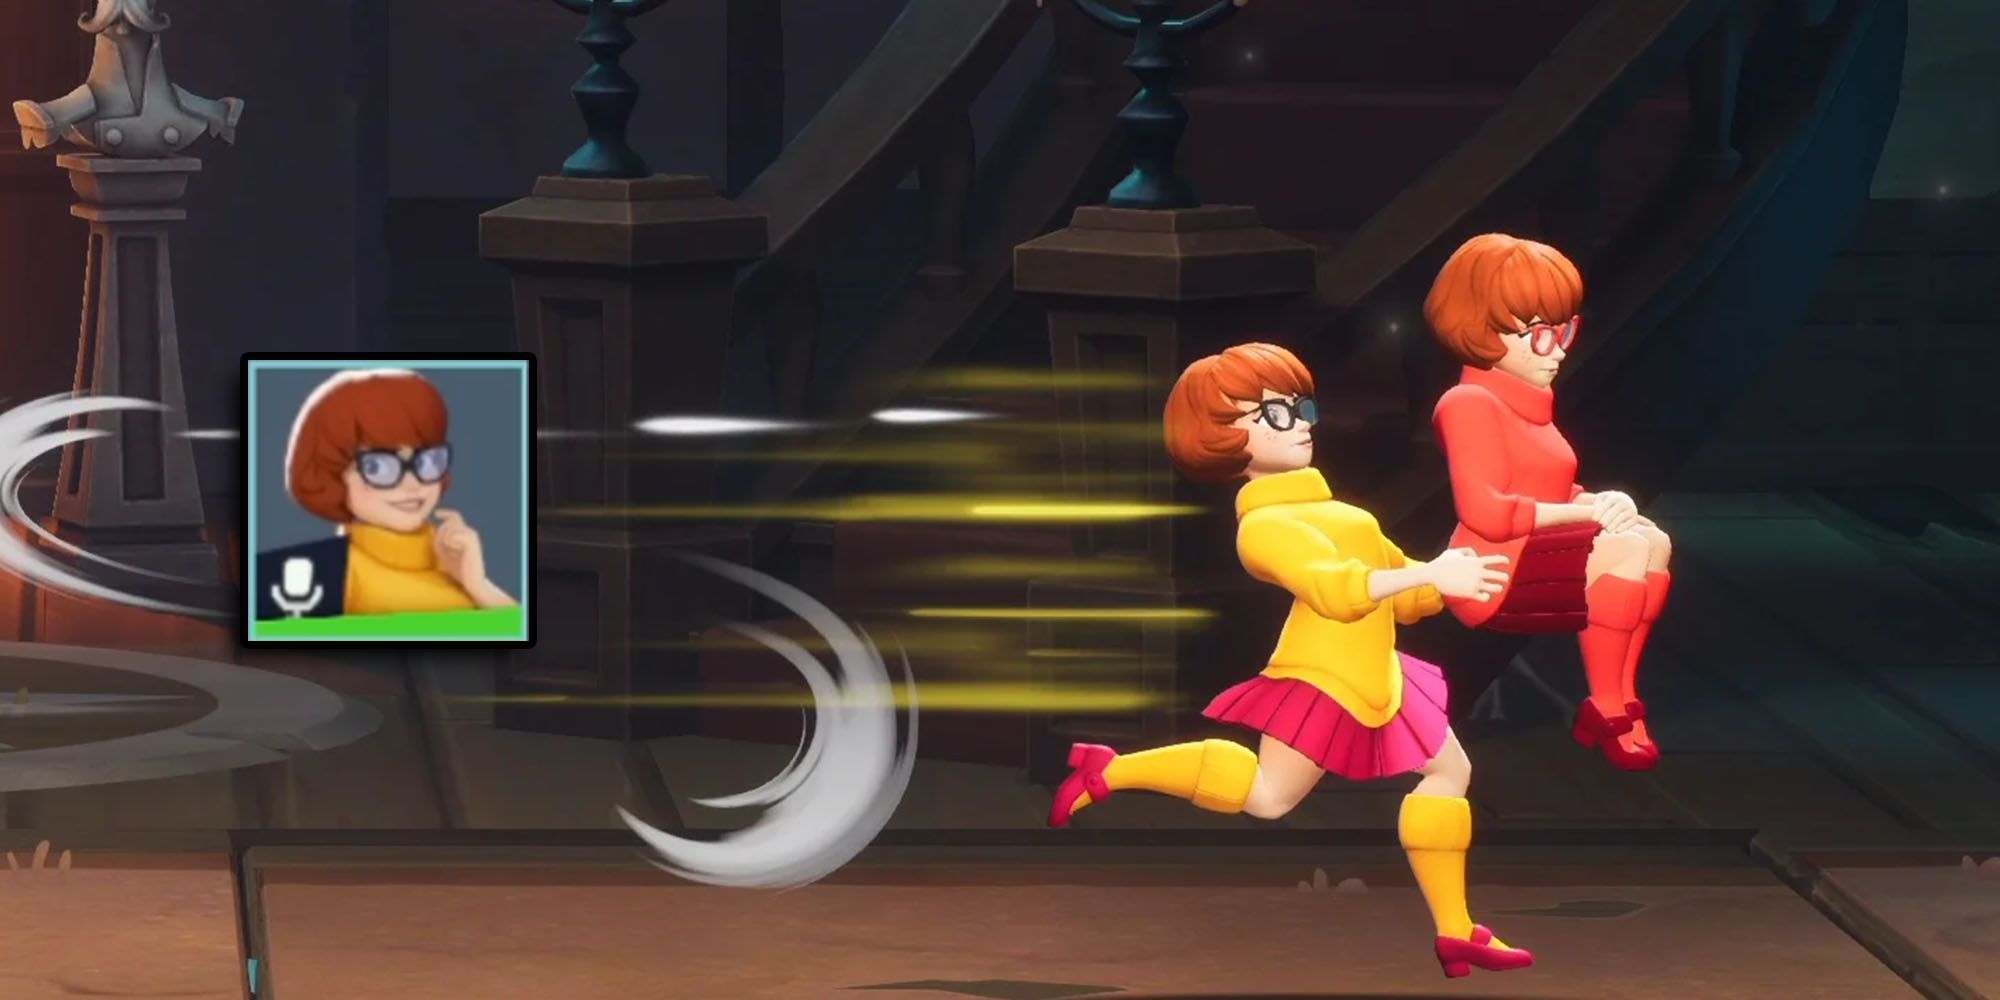 Multiversus - Velma Carrying Velma With Announcer Pack Icon Overlaid On Top